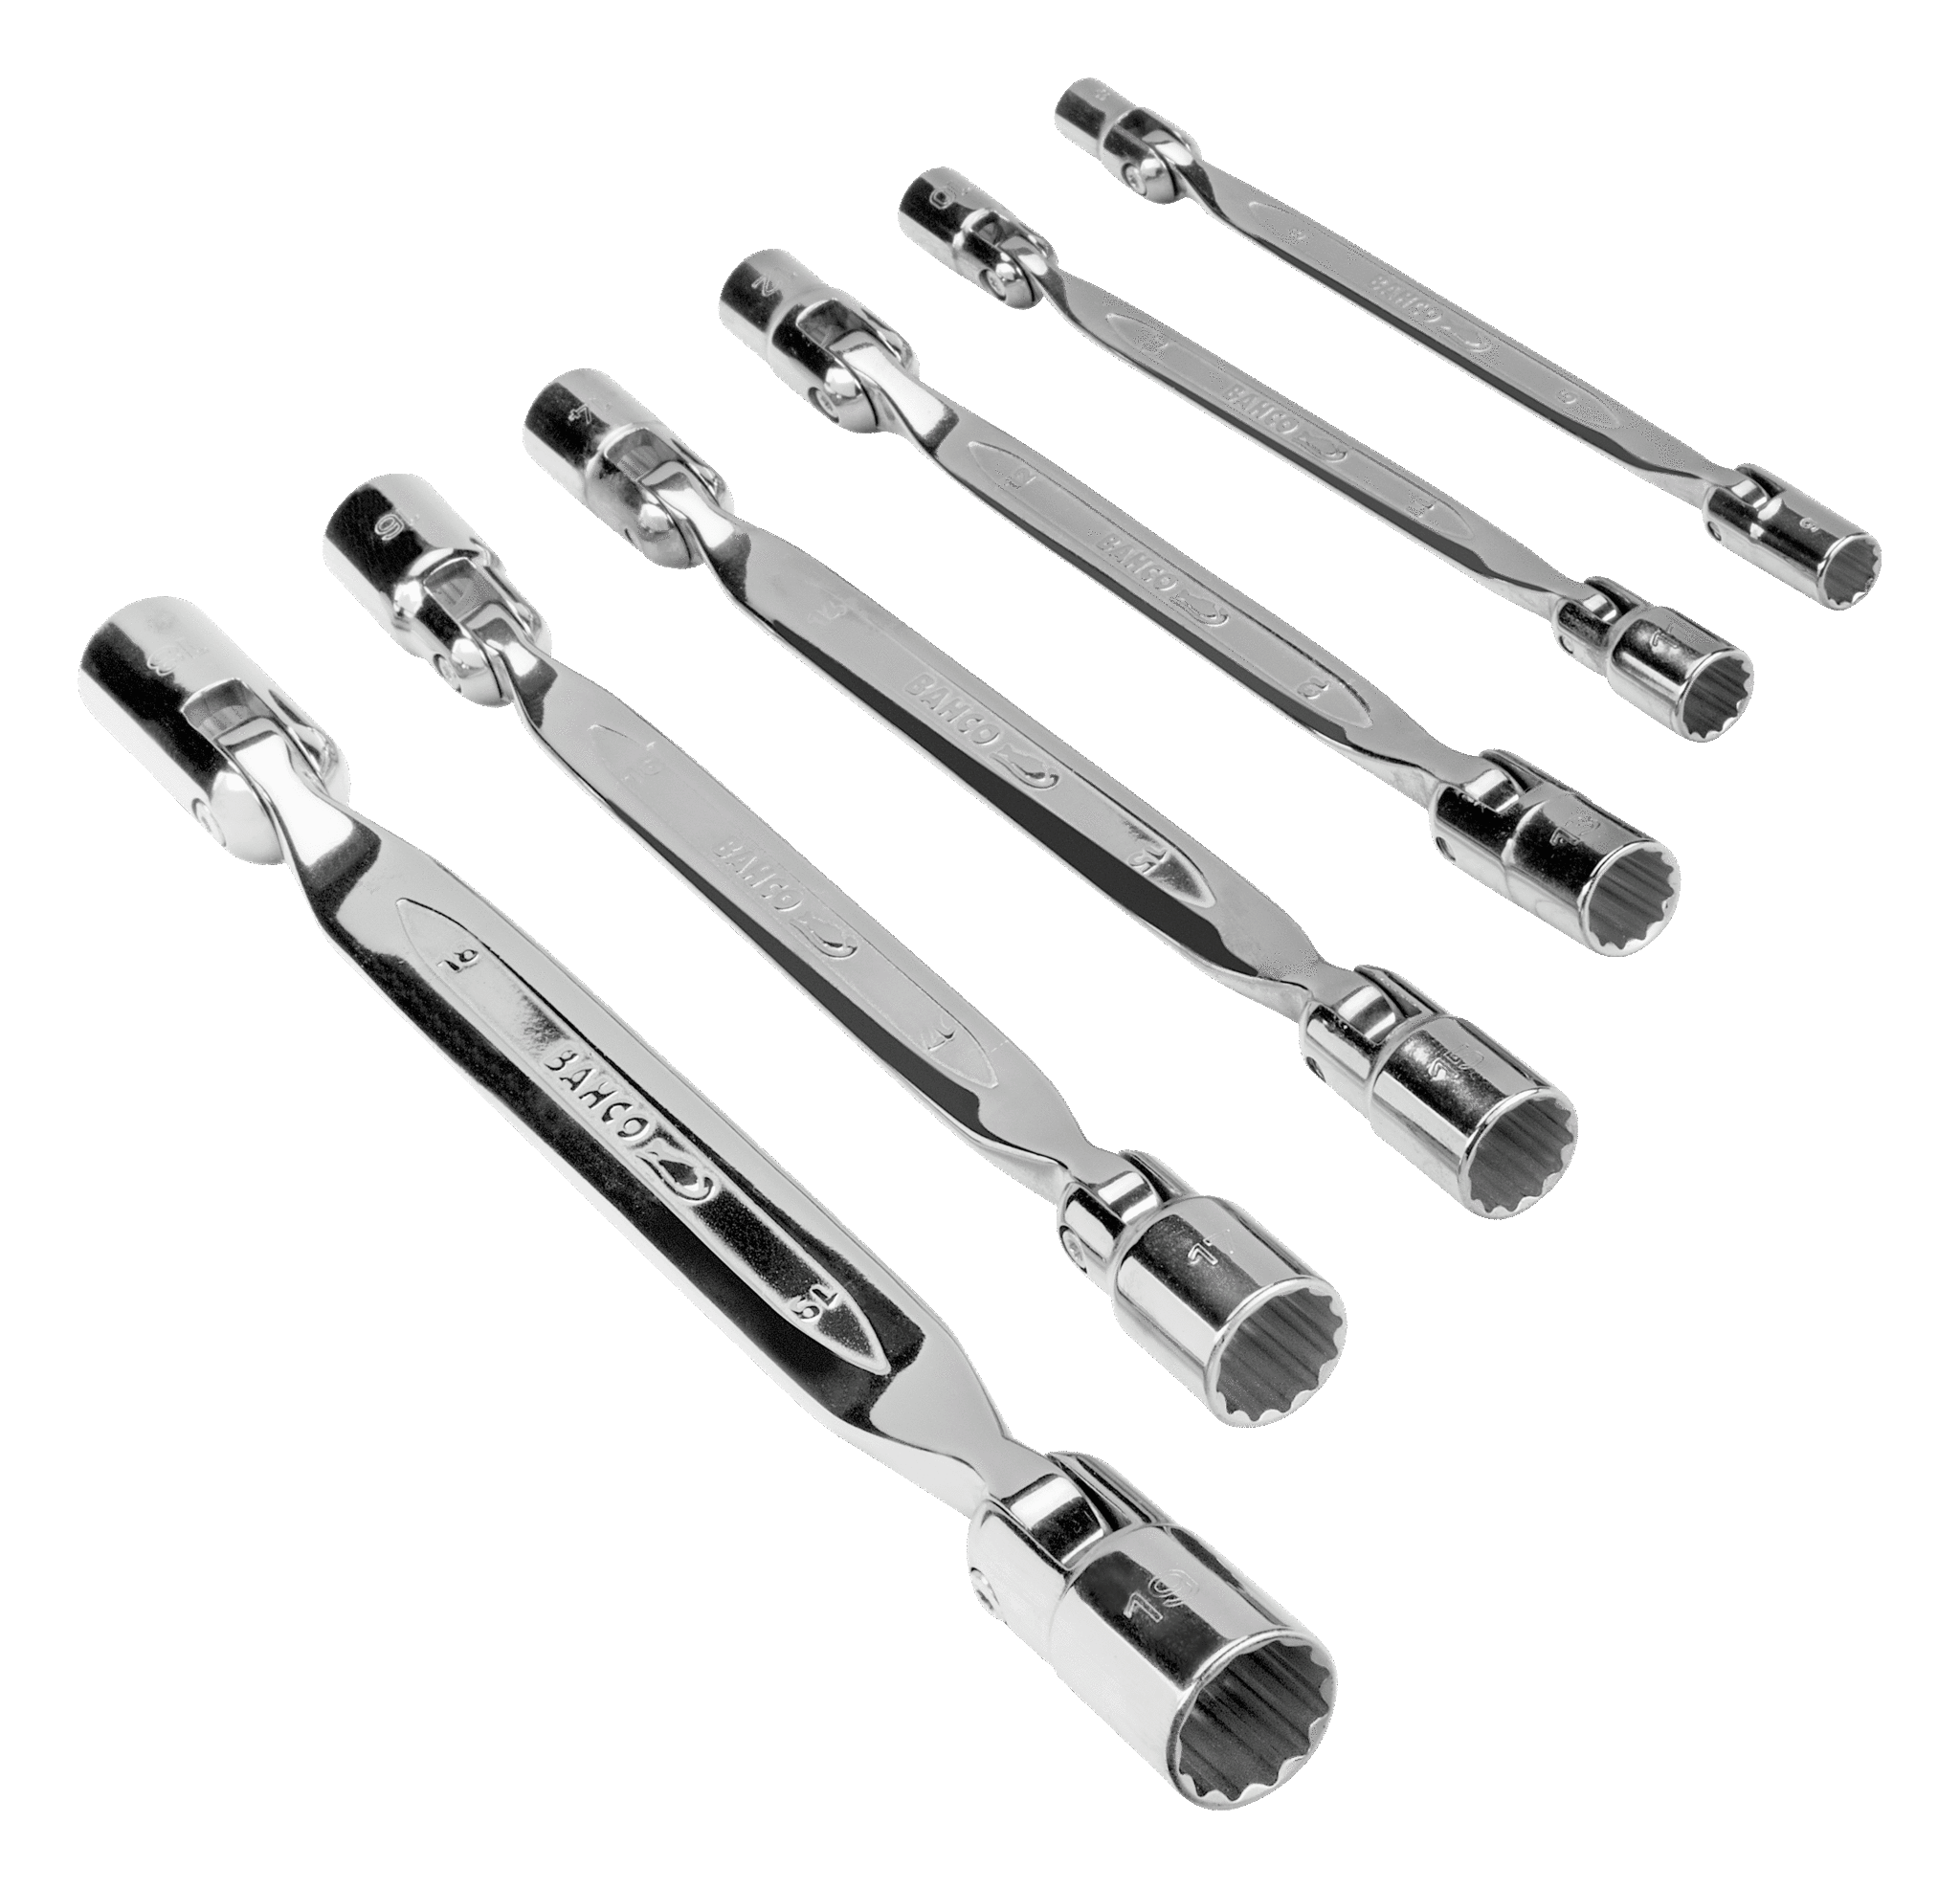 BAHCO 4040M/S6 Metric Double Ended Swivel Head Socket Wrench Set - Premium Socket Wrench from BAHCO - Shop now at Yew Aik.